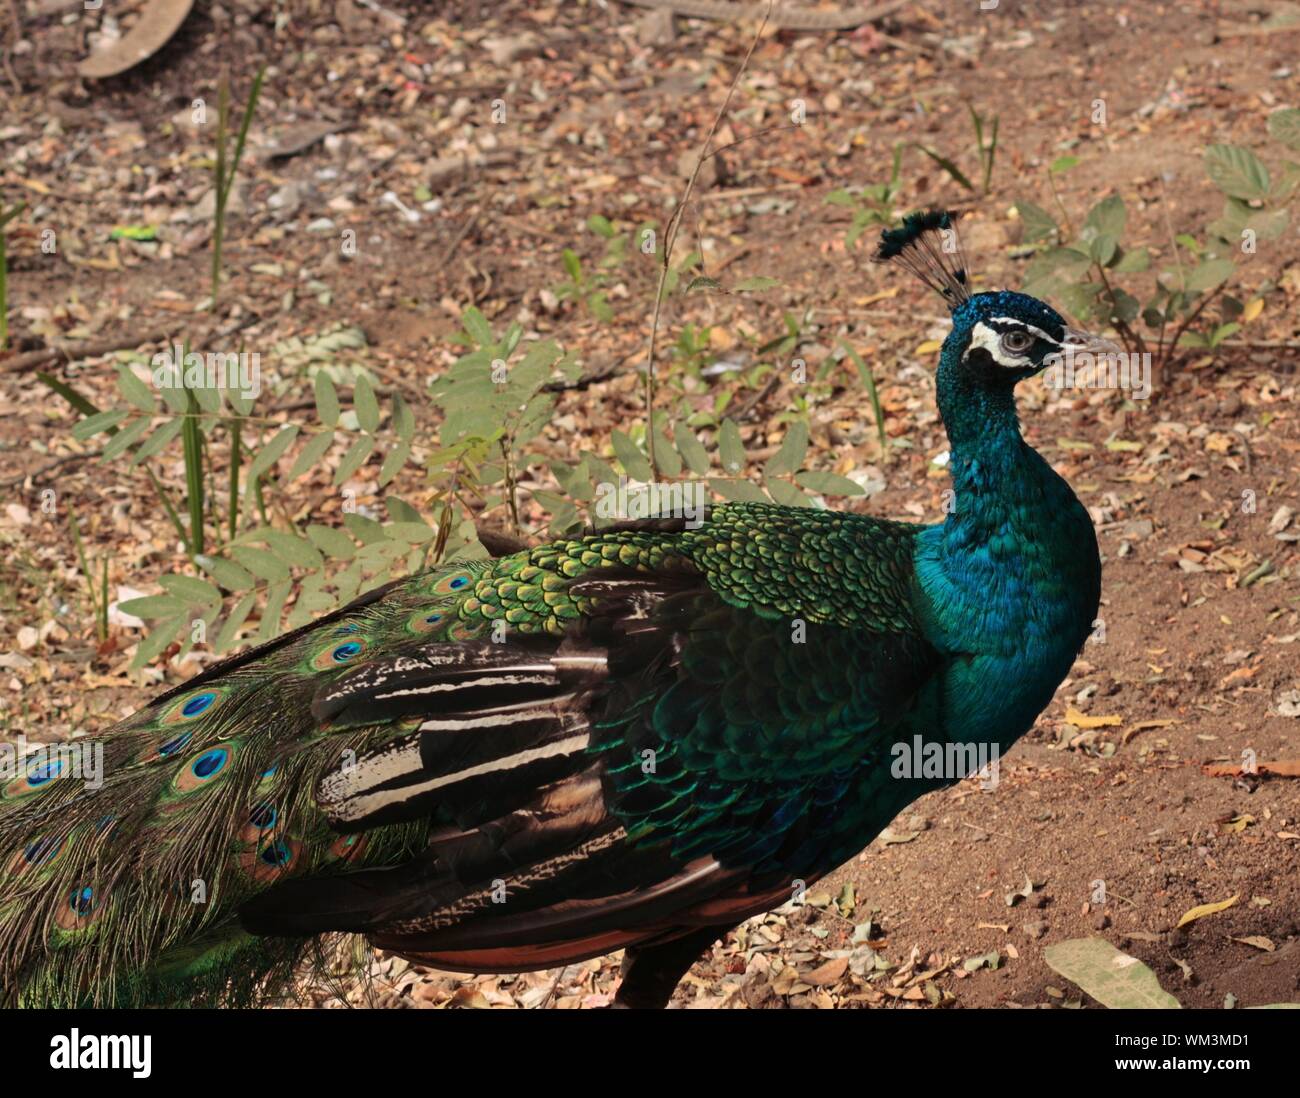 Close-up Of Peacock At Nehru Zoological Park Stock Photo - Alamy